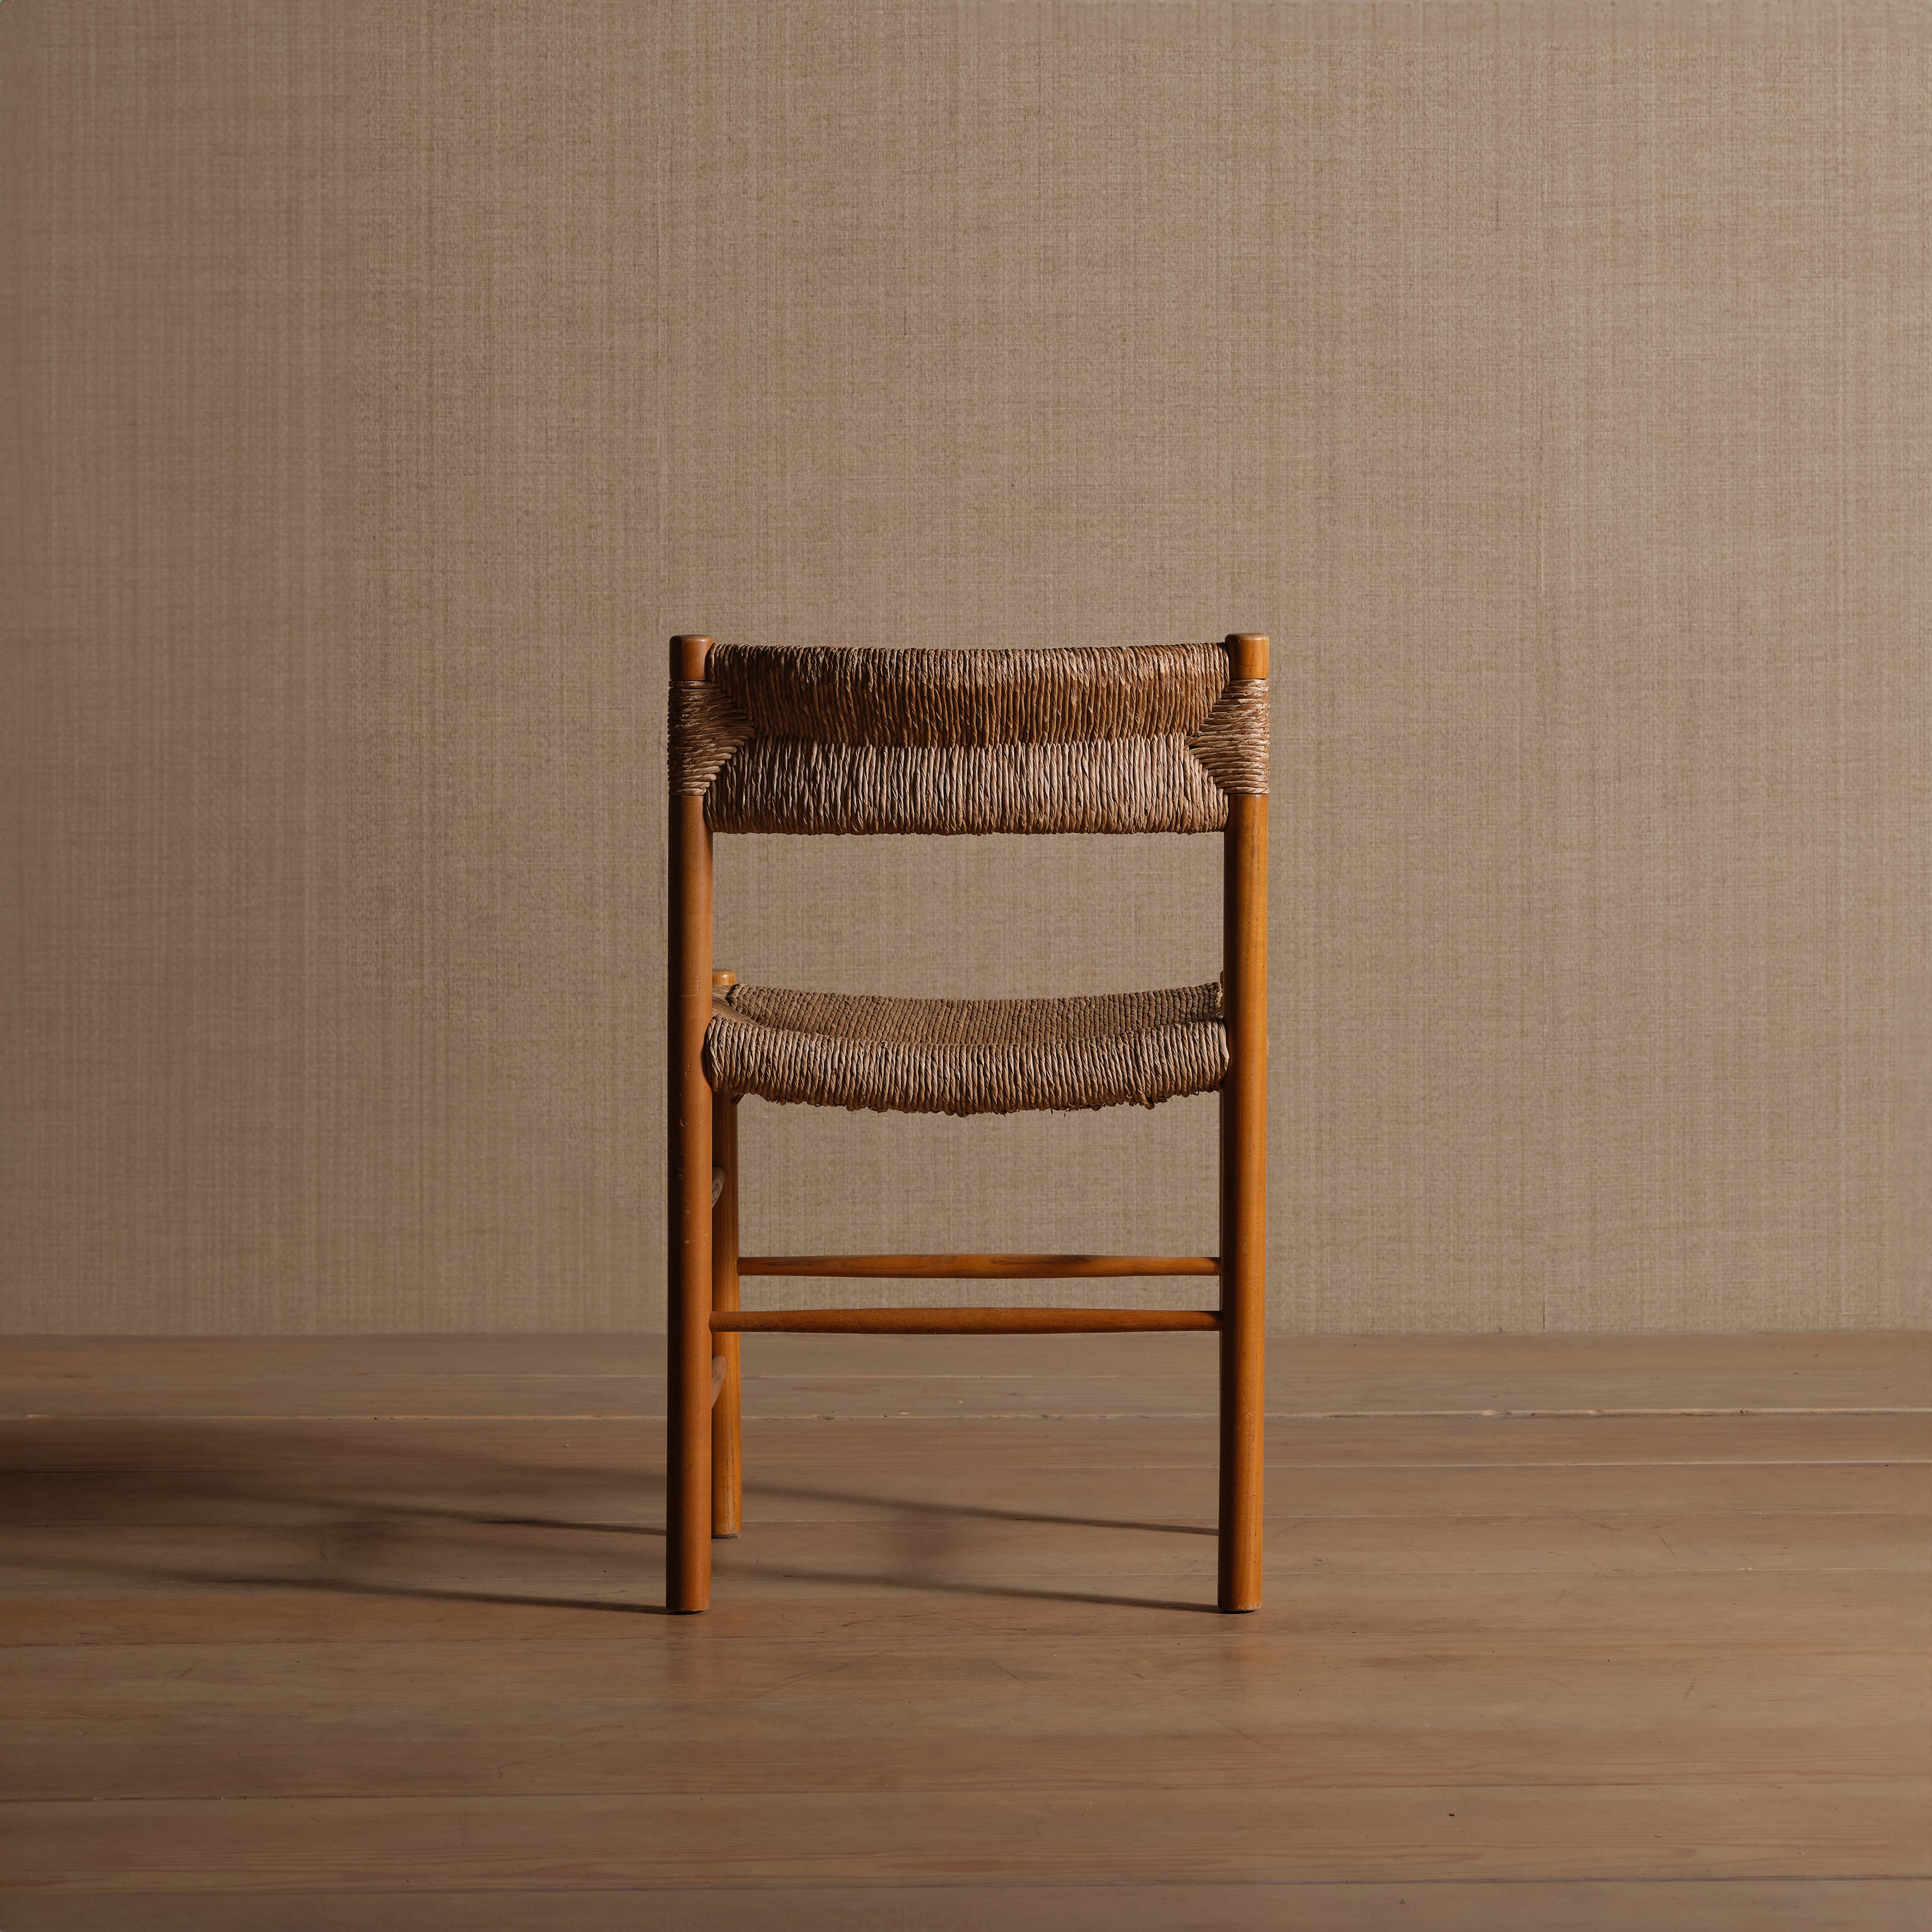 a wooden chair sitting on top of a wooden floor